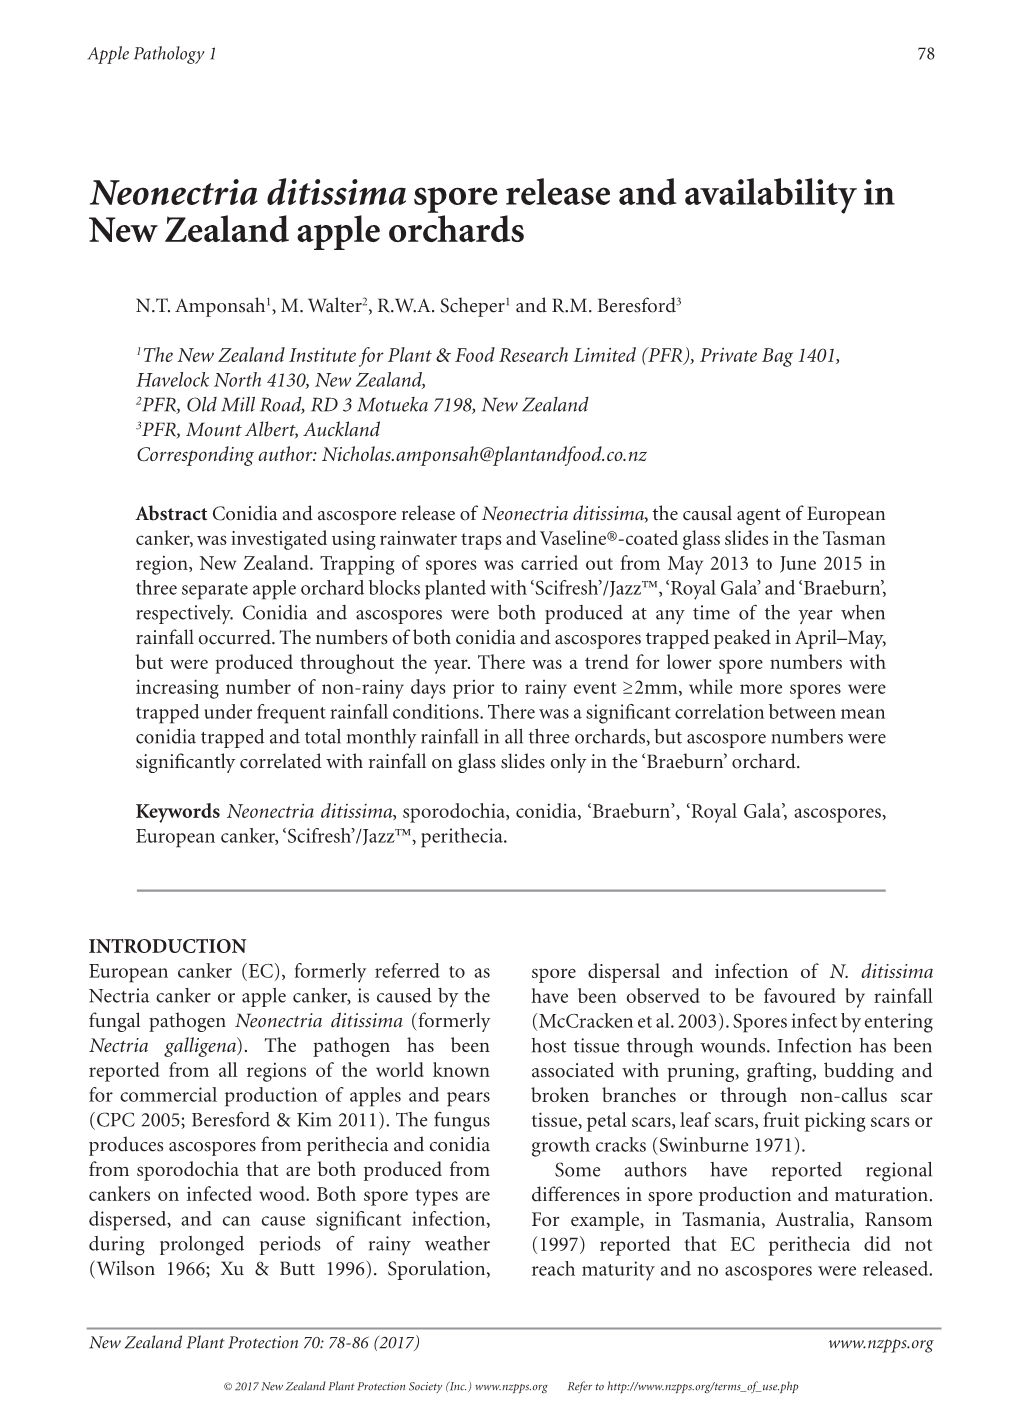 Neonectria Ditissima Spore Release and Availability in New Zealand Apple Orchards